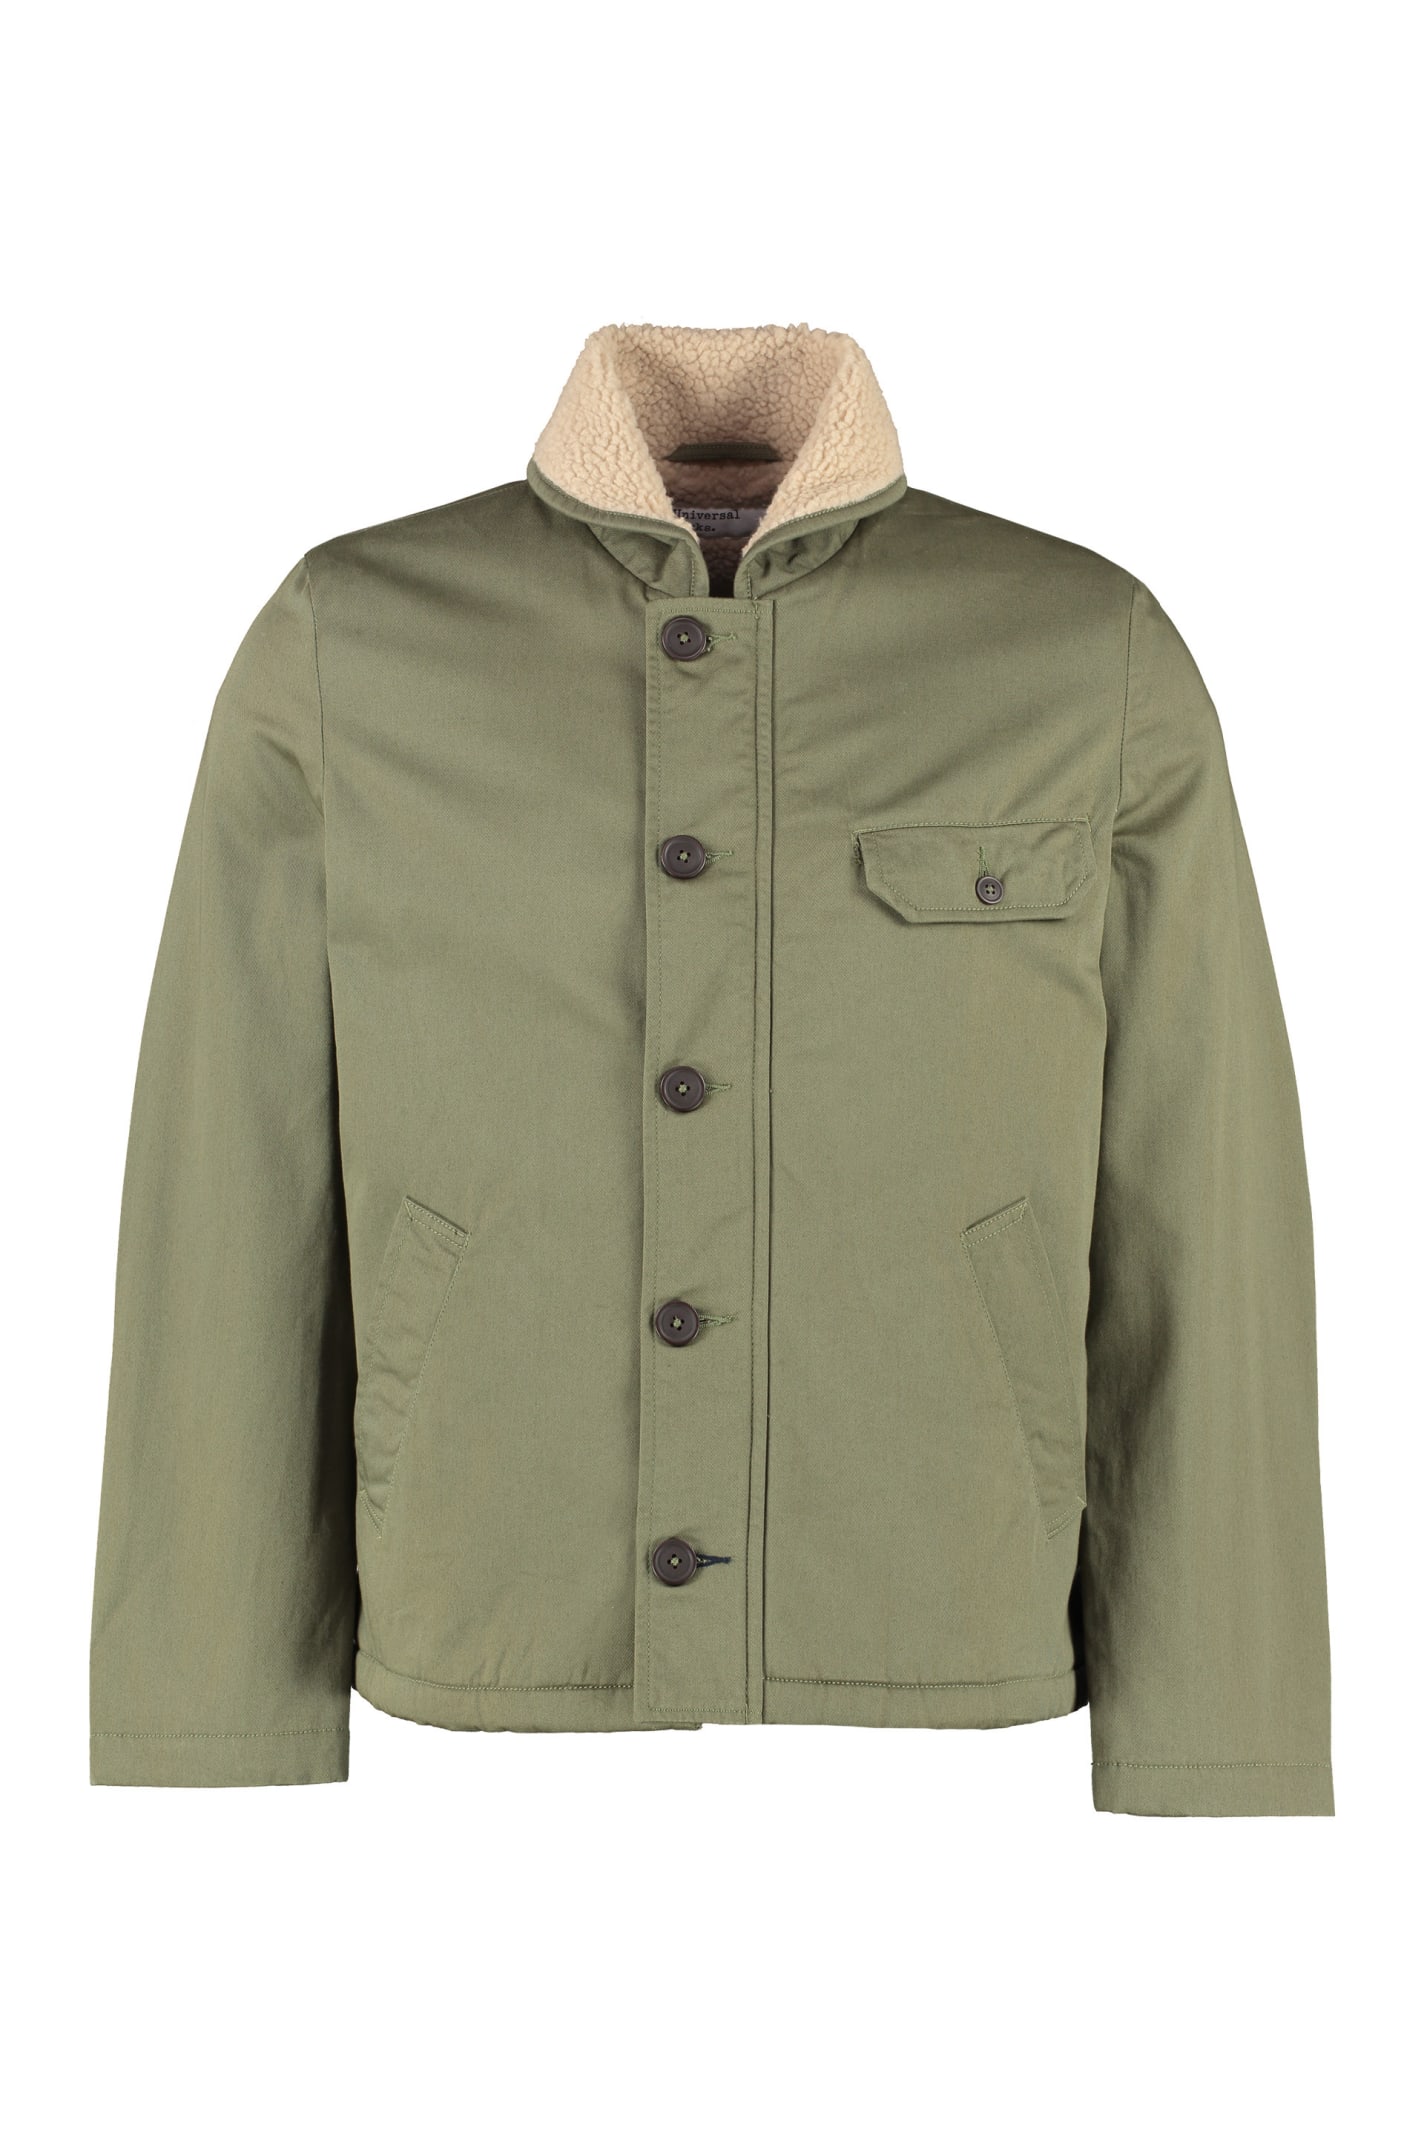 Universal Works N1 Button-front Cotton Jacket